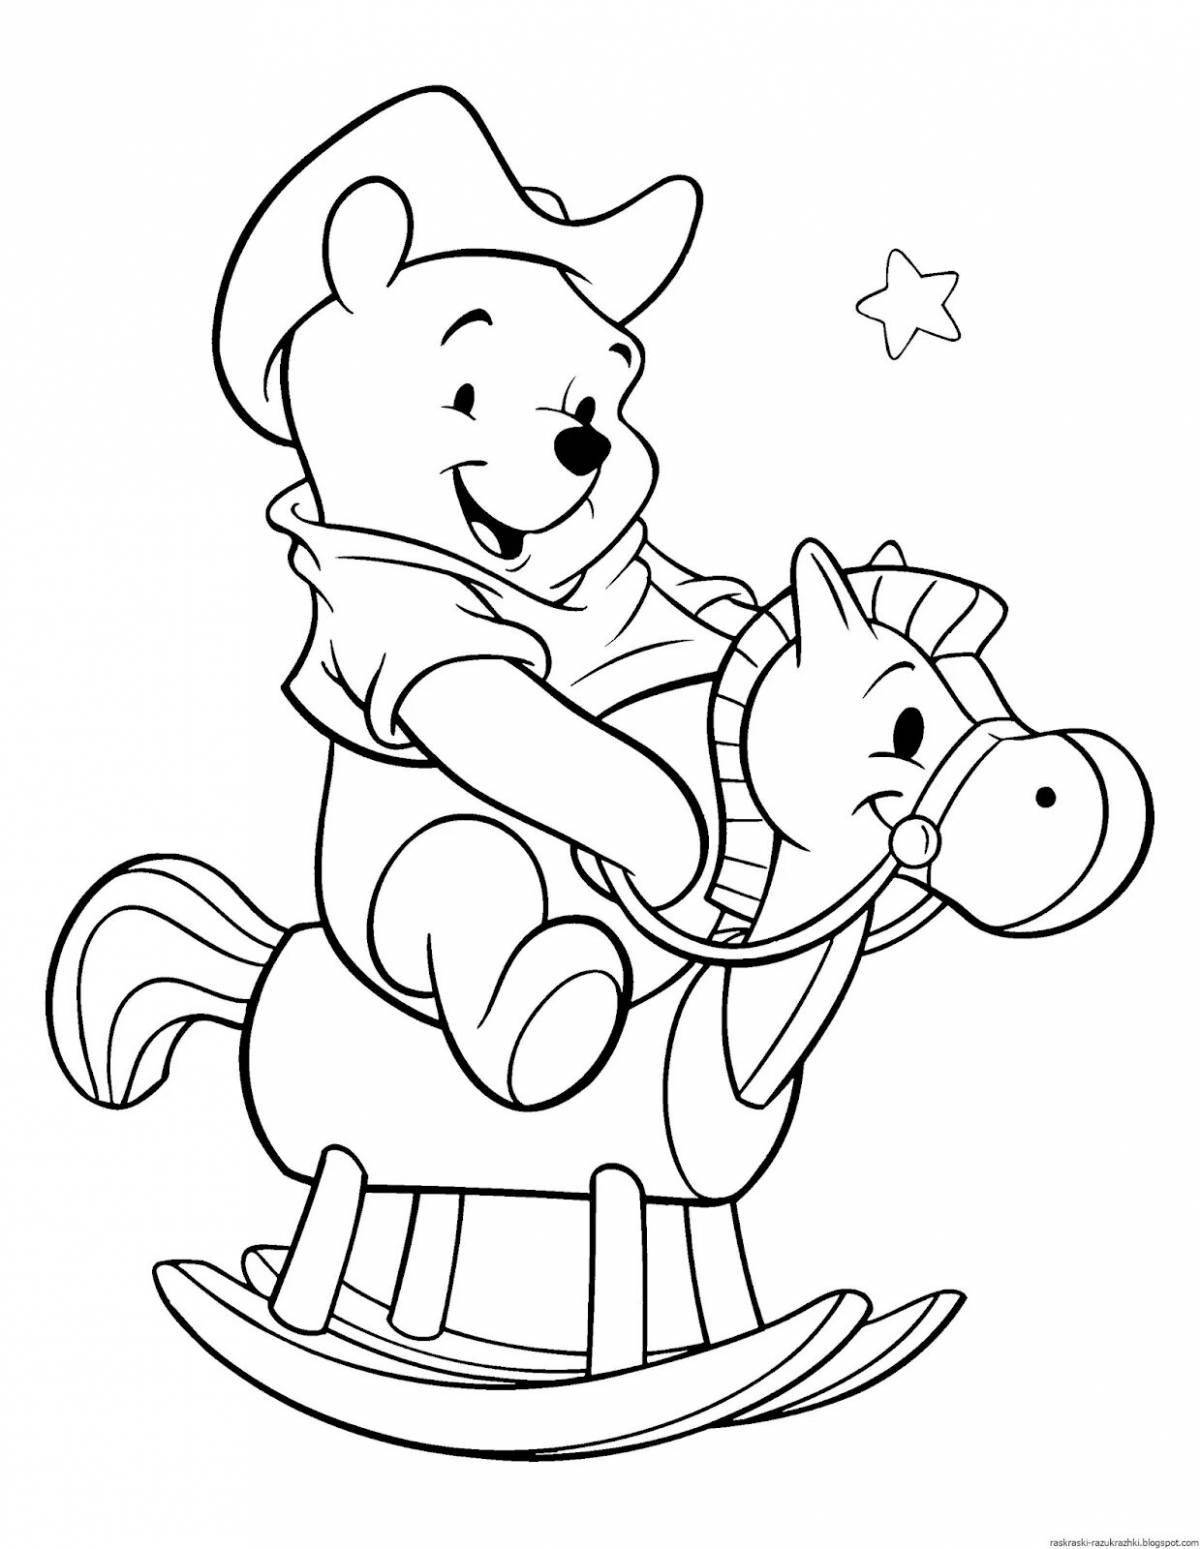 Serene baby coloring page